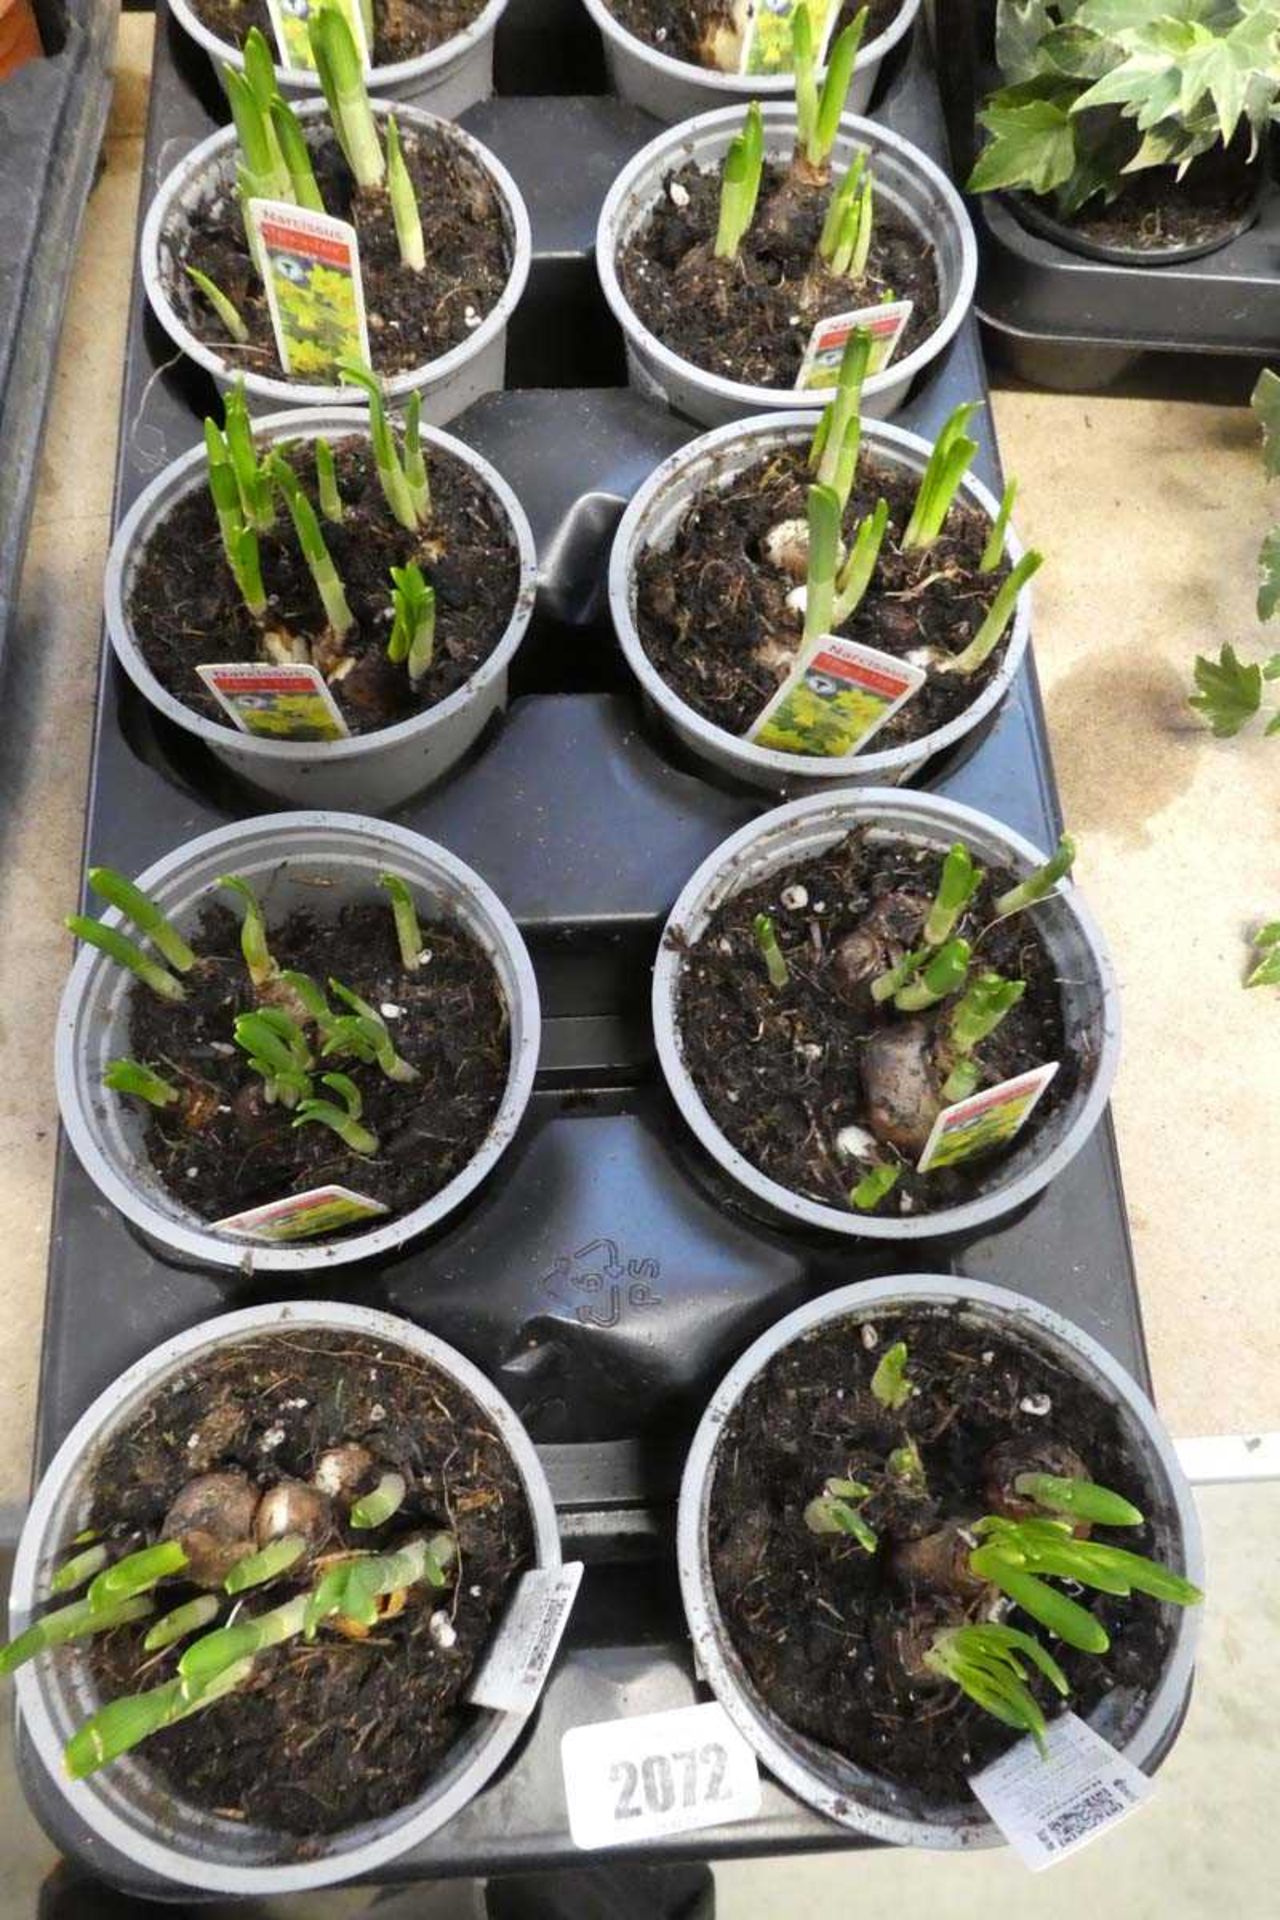 Tray containing 10 pots of narcissi tete-a-tete bulbs